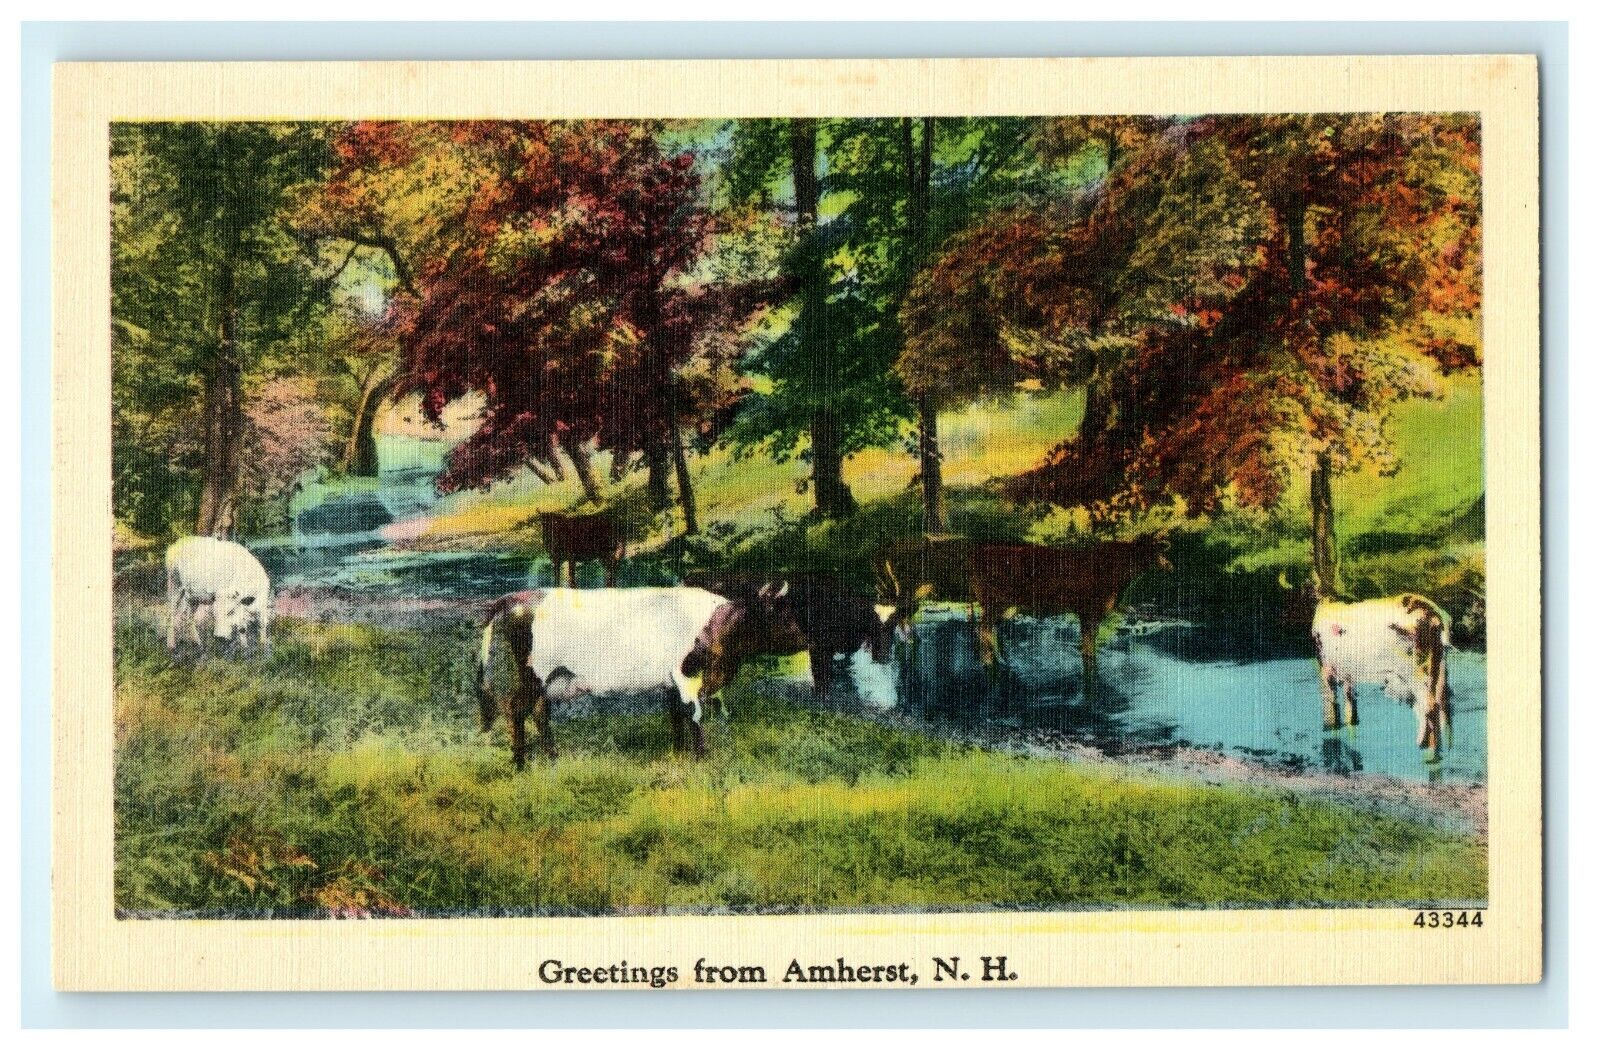 1911 Greetings from Amherst, Hillsborough County, New Hampshire NH Postcard